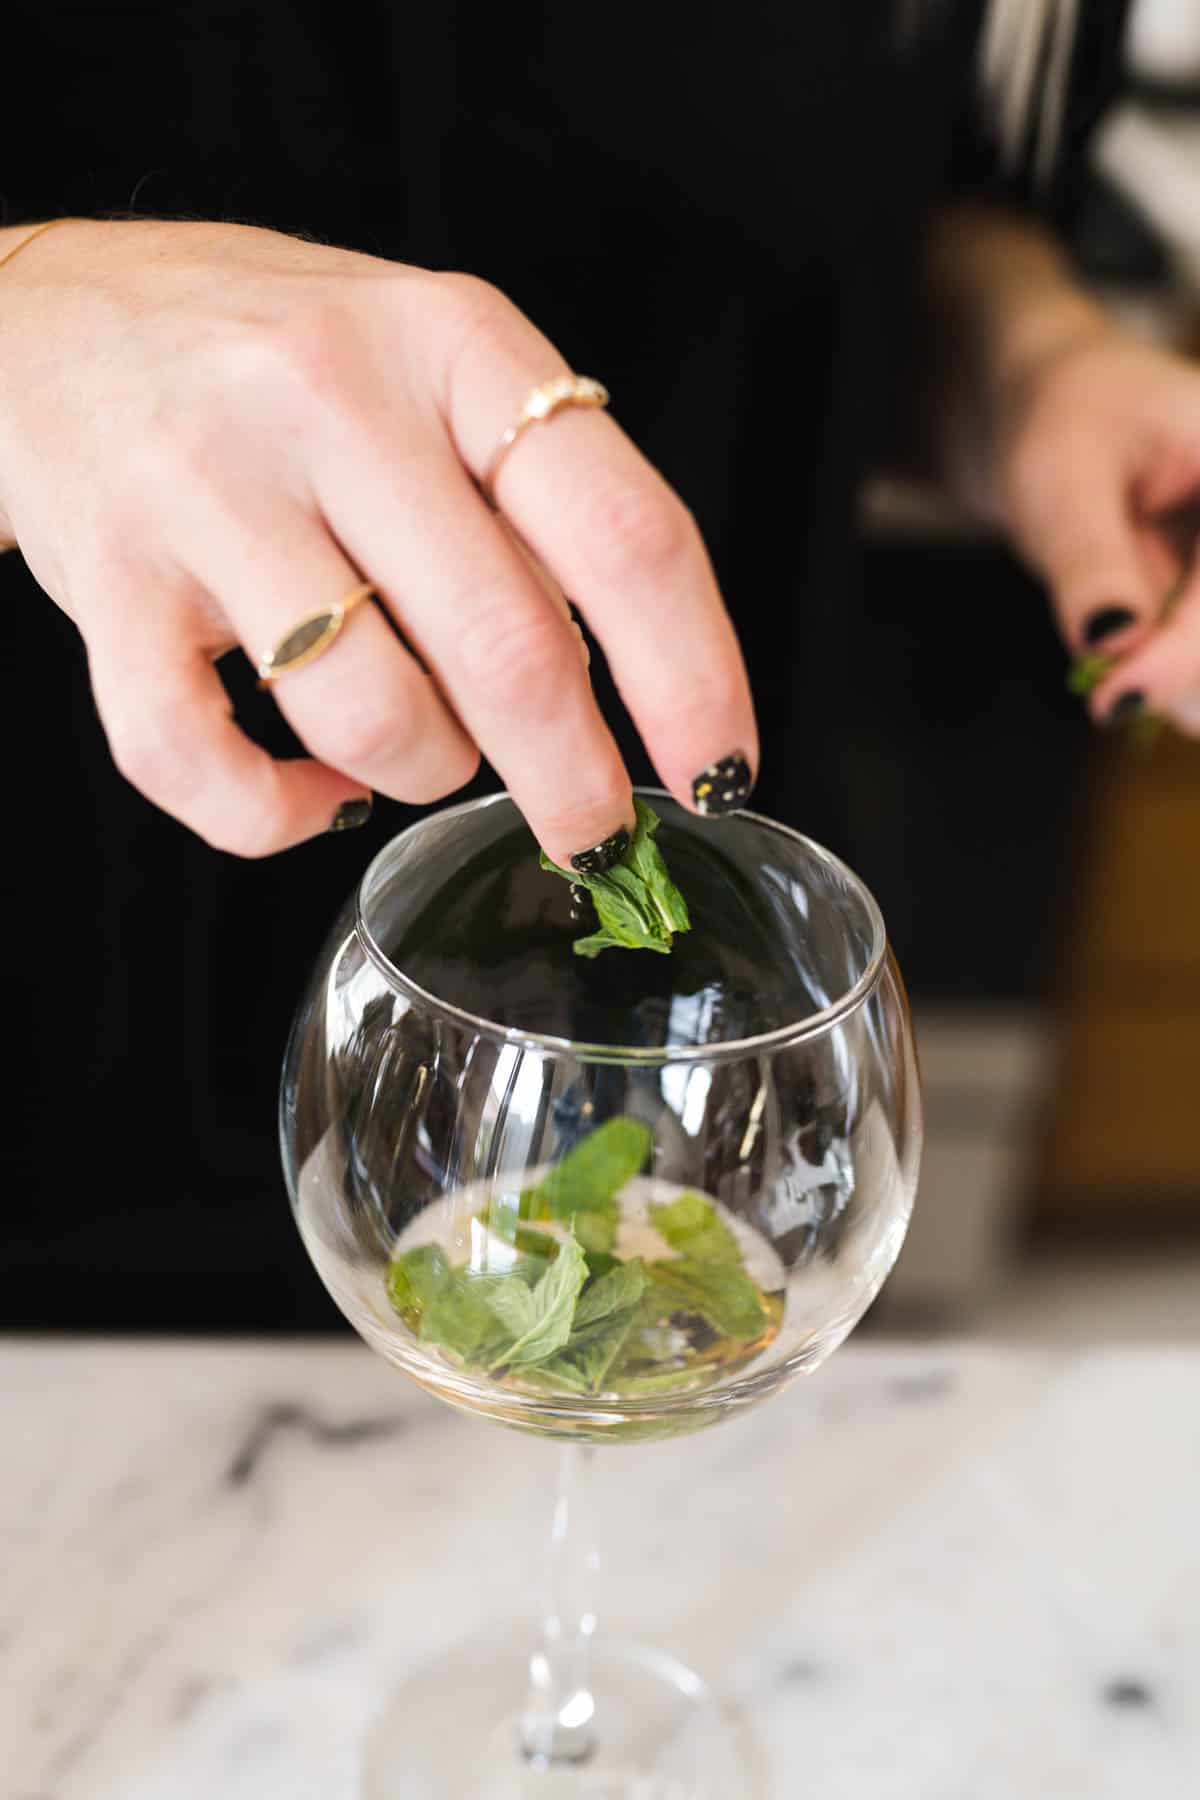 Woman adding mint leaves to a spritz glass of St Germain.